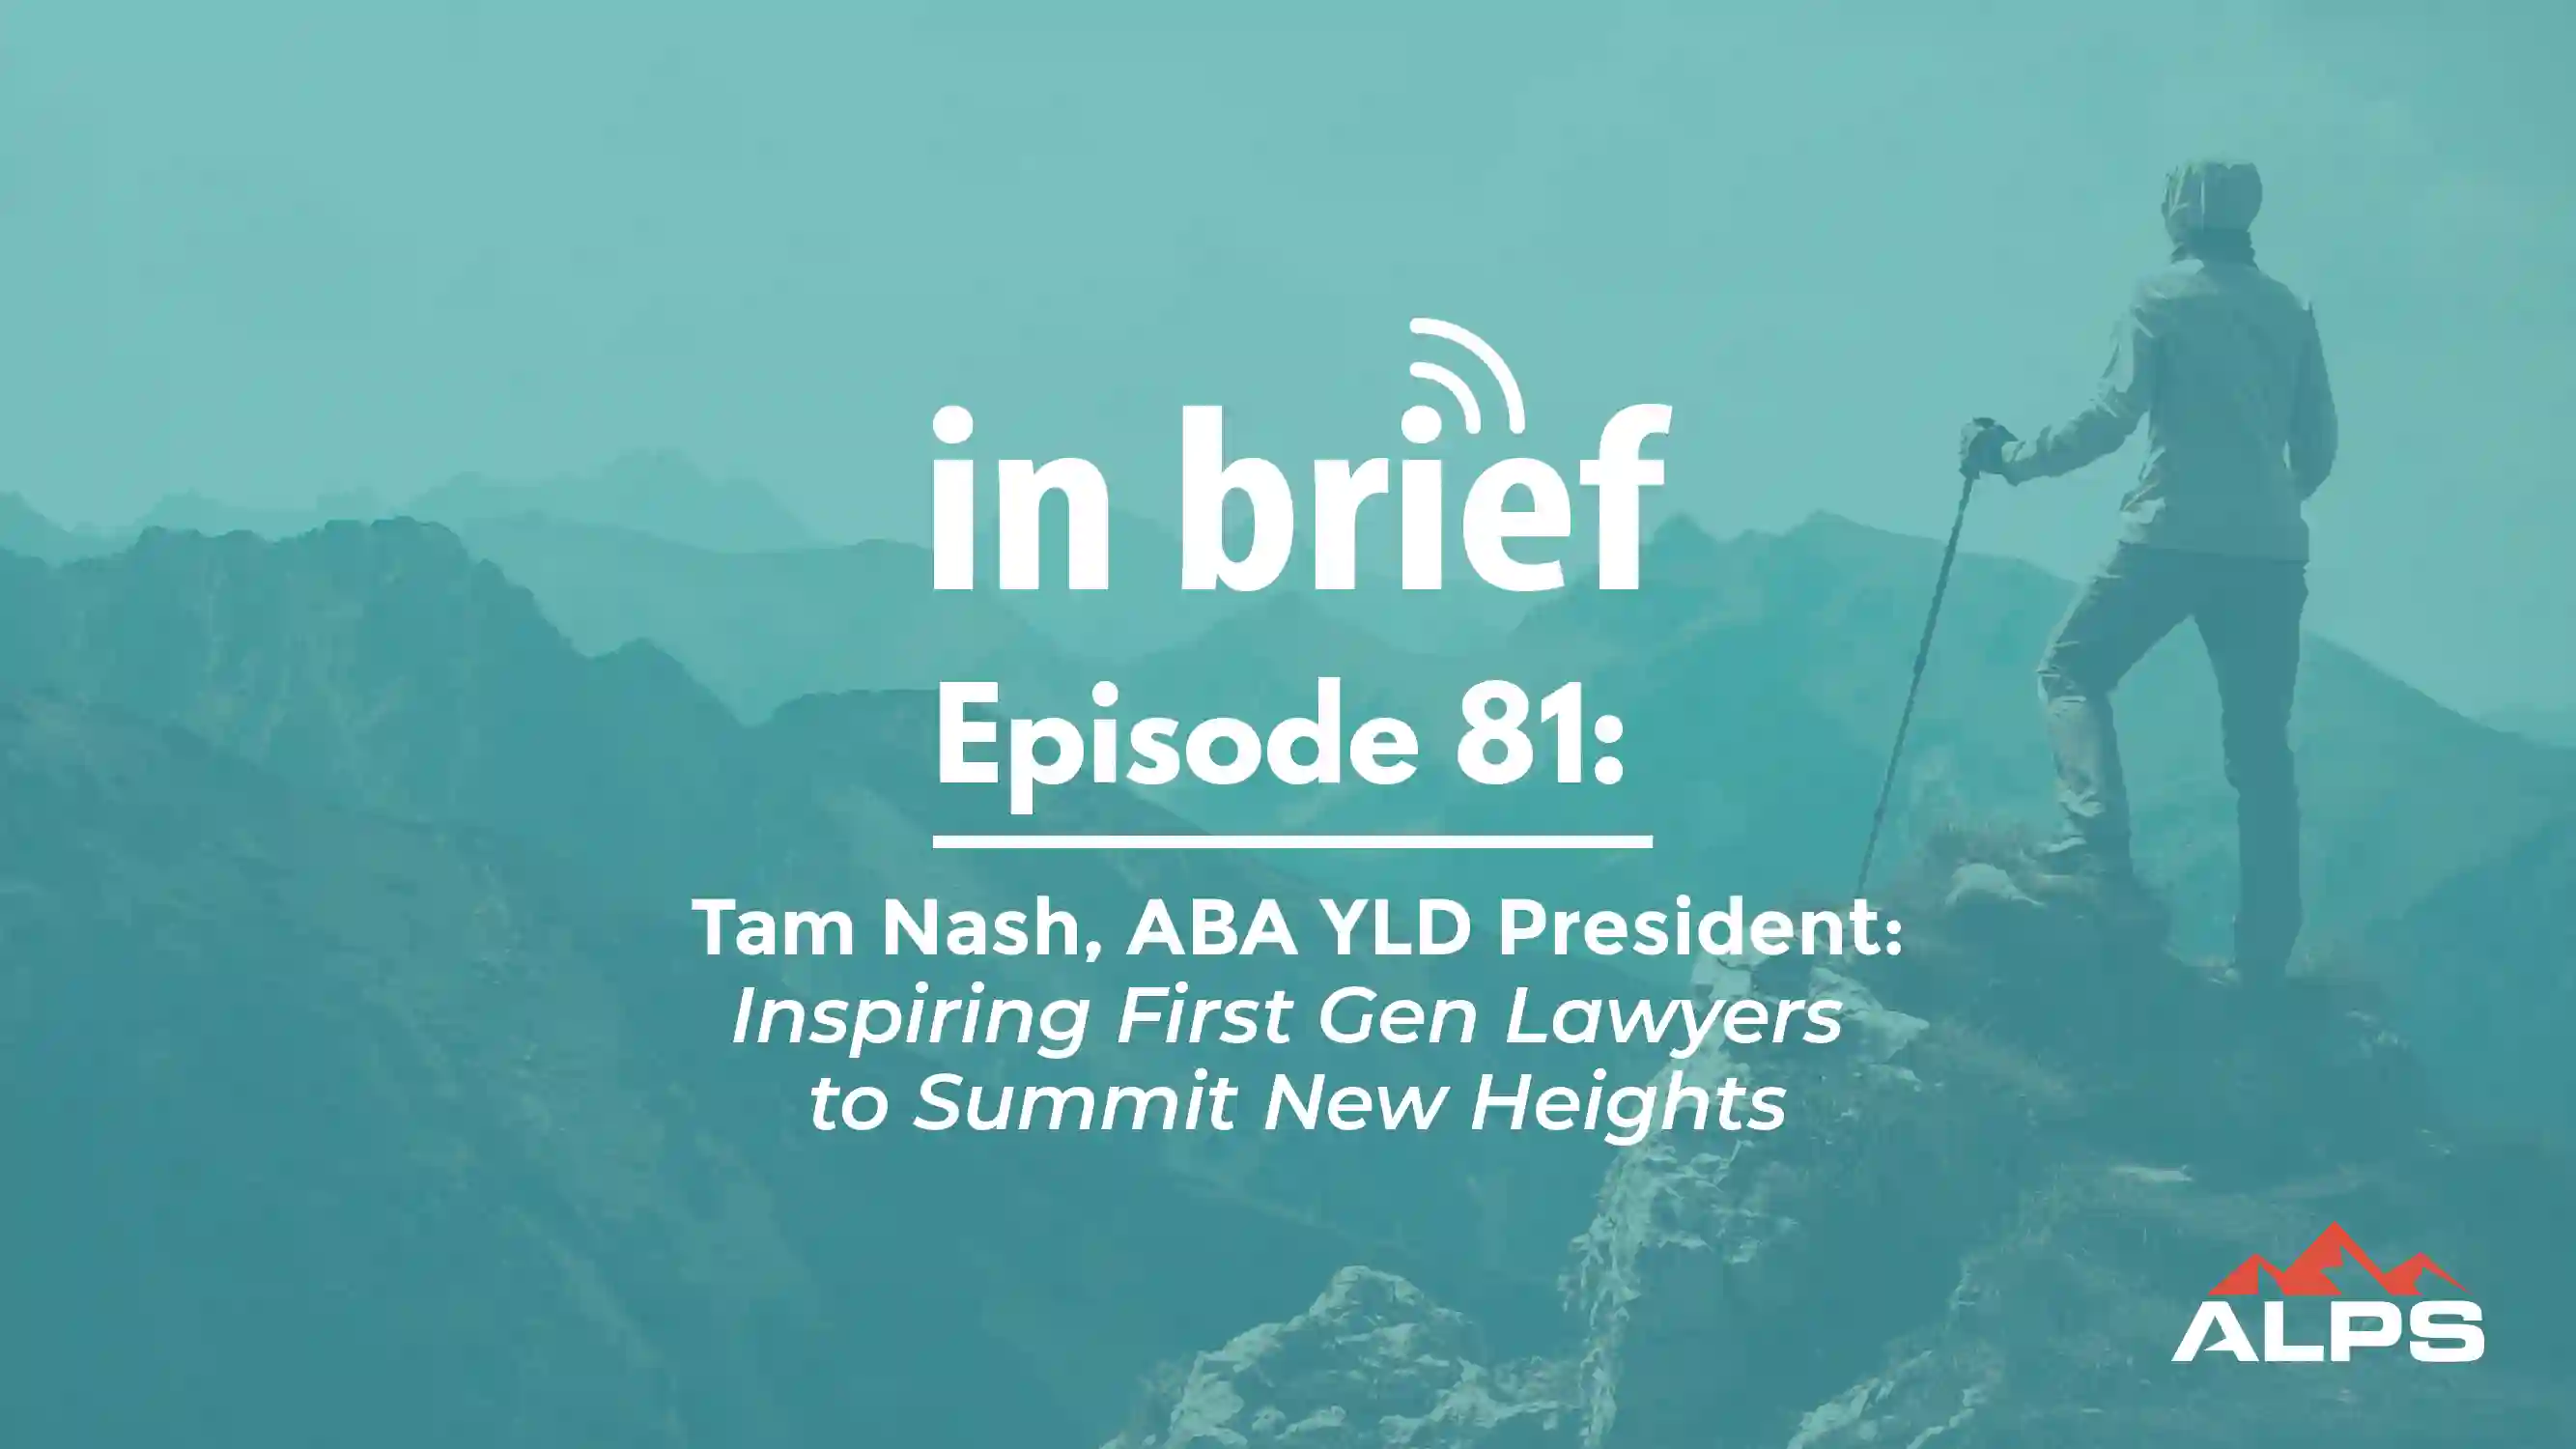 ALPS In Brief -Episode 81: Tam Nash, ABA YLD President - Inspiring First Gen Lawyers to Summit New Heights